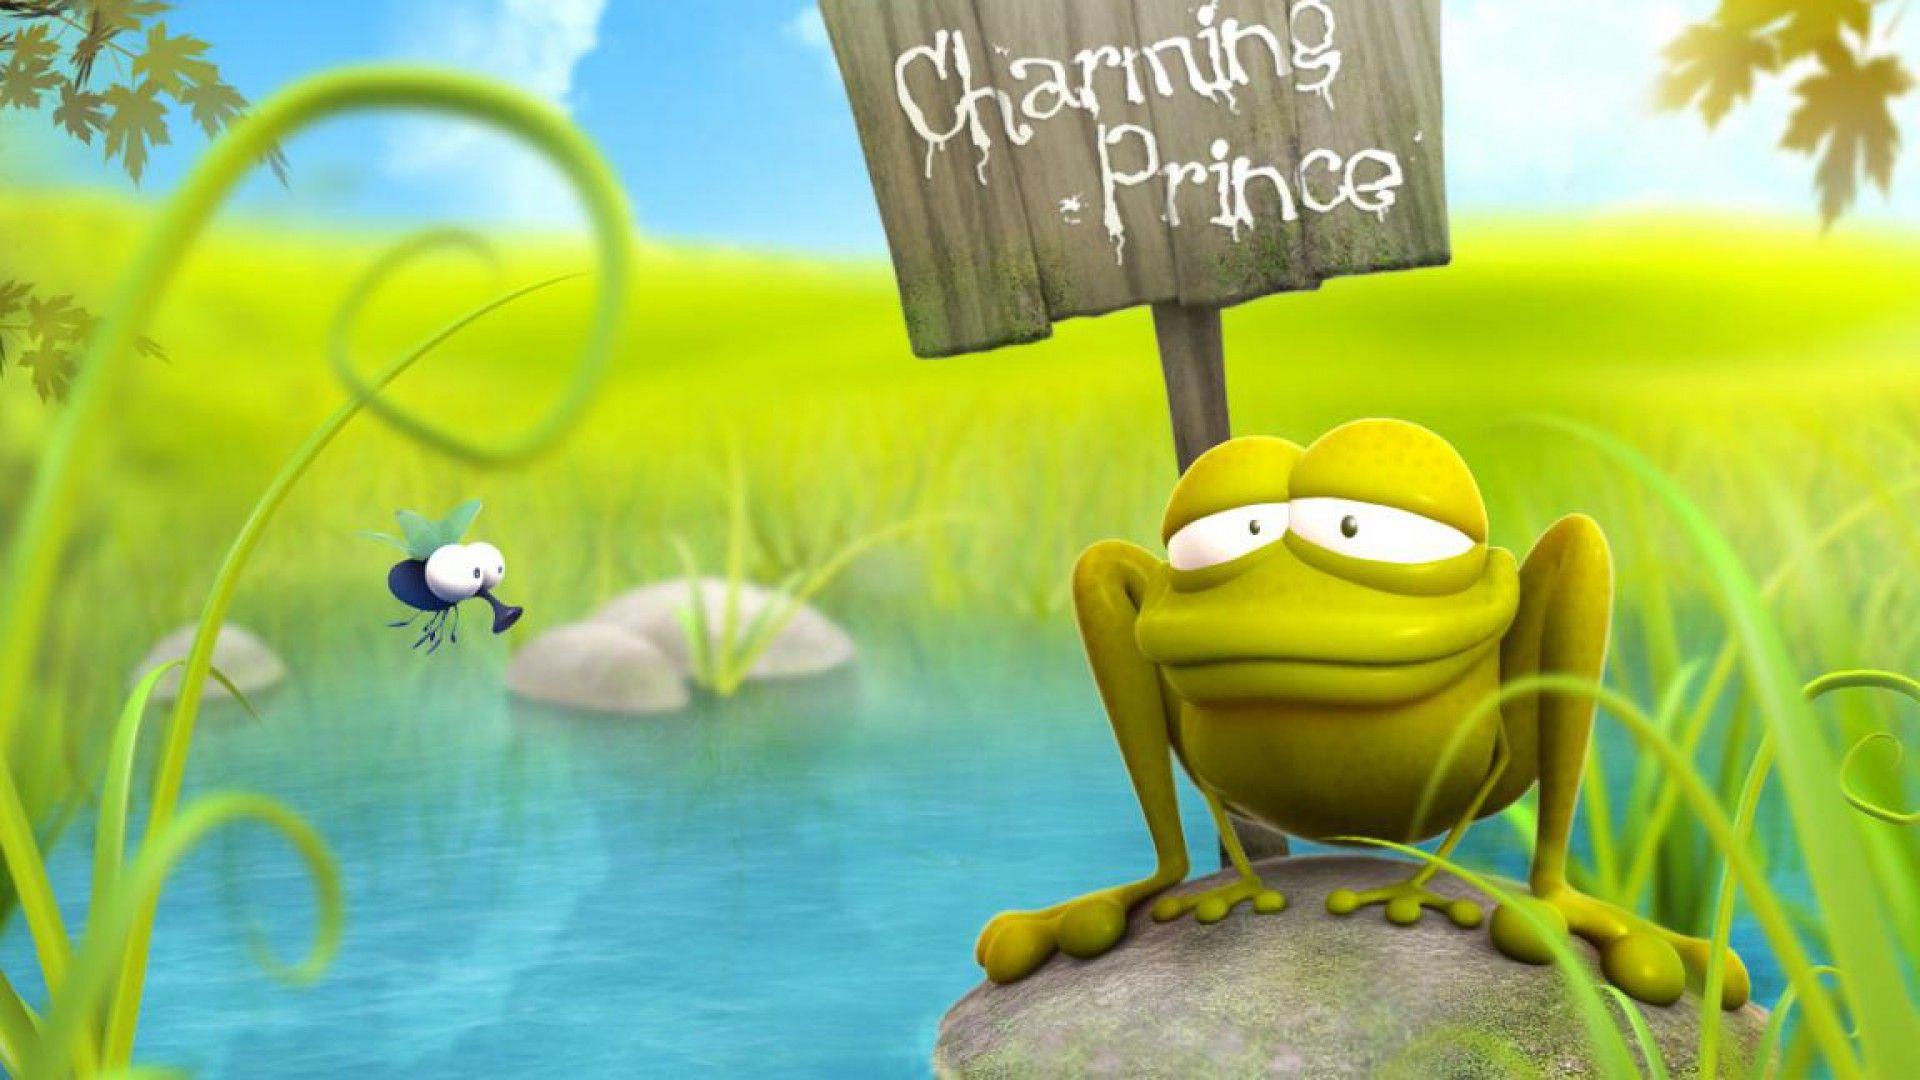 Funny Frog Cartoon Picture Wallpaper